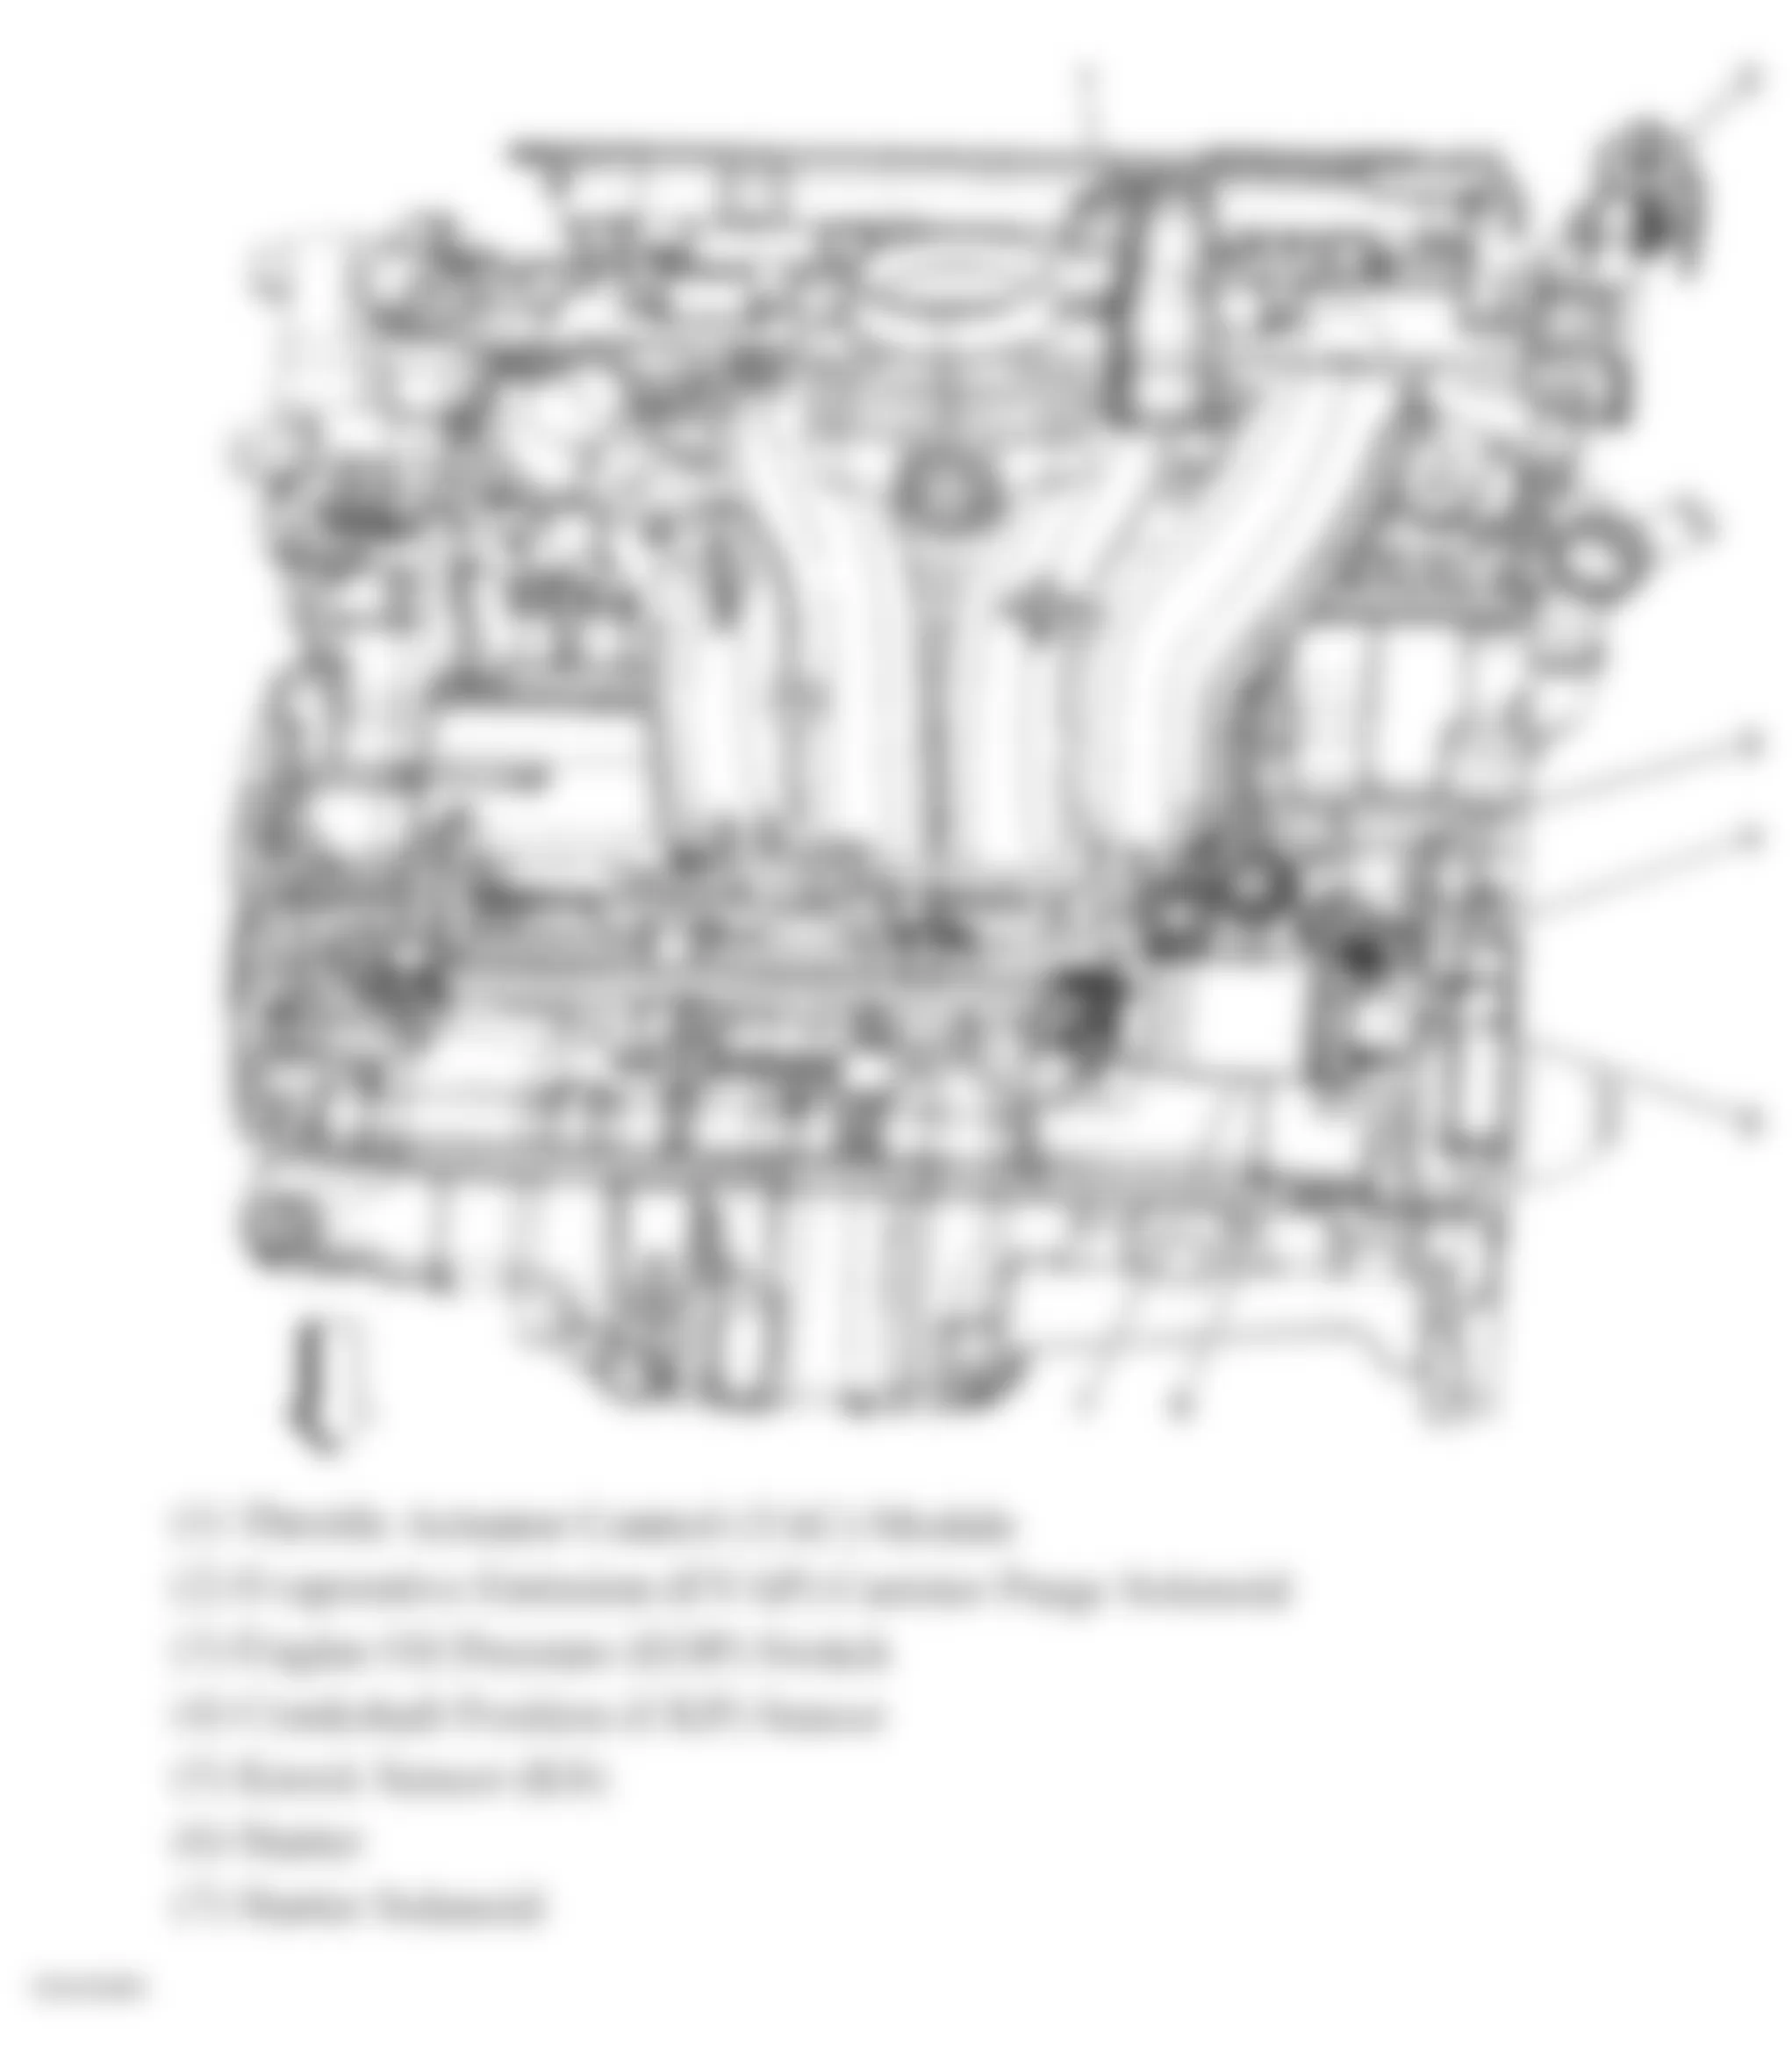 Chevrolet HHR LT 2009 - Component Locations -  Front Of Engine (2.2L)